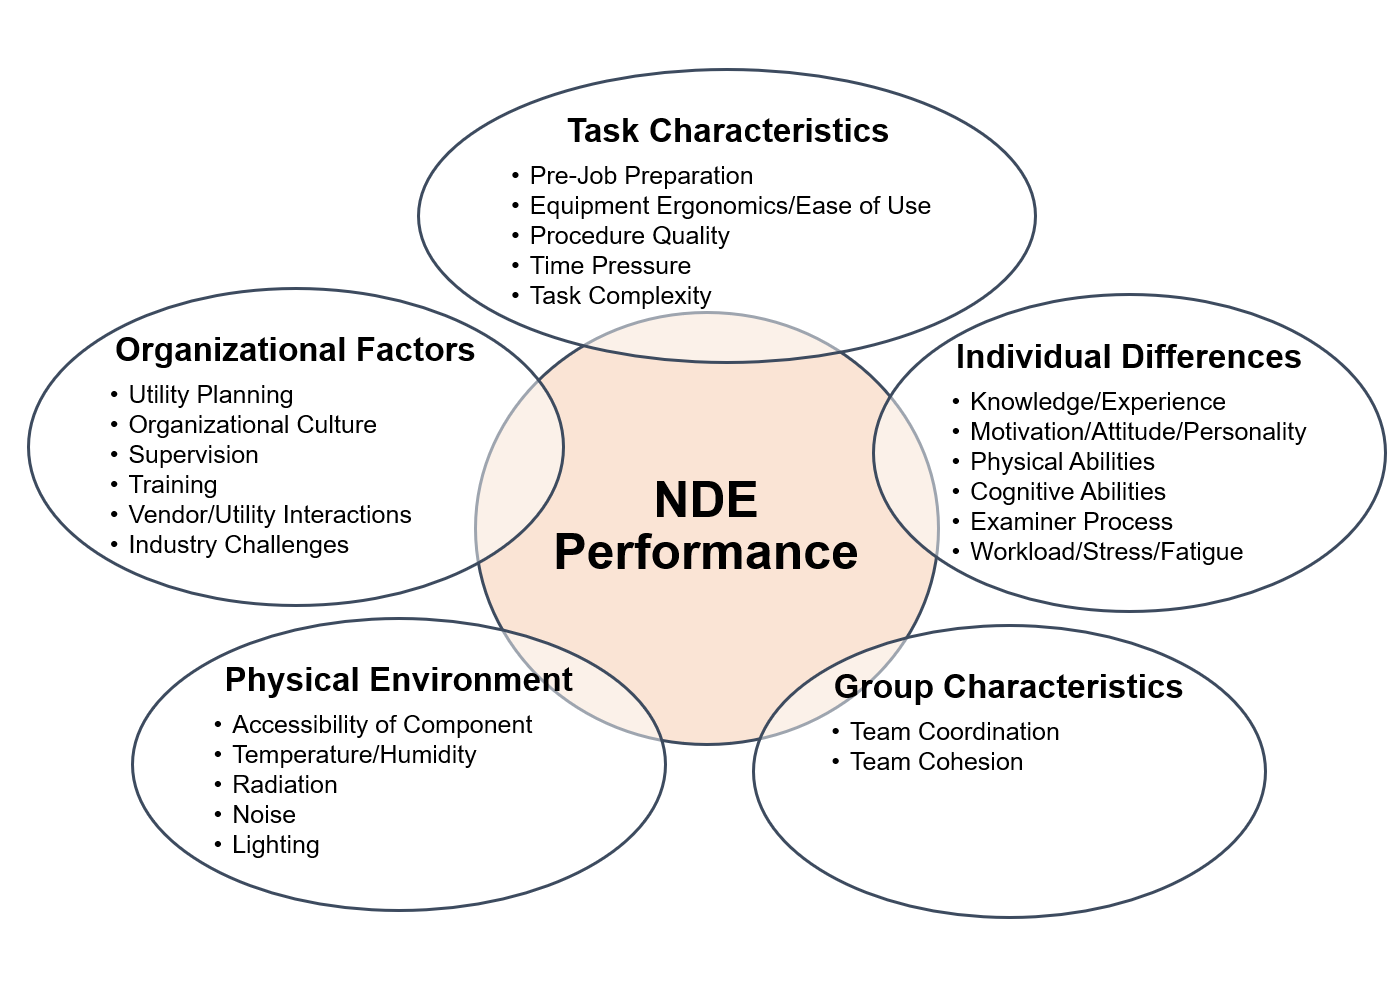 Diagram of different aspects of NDE performance